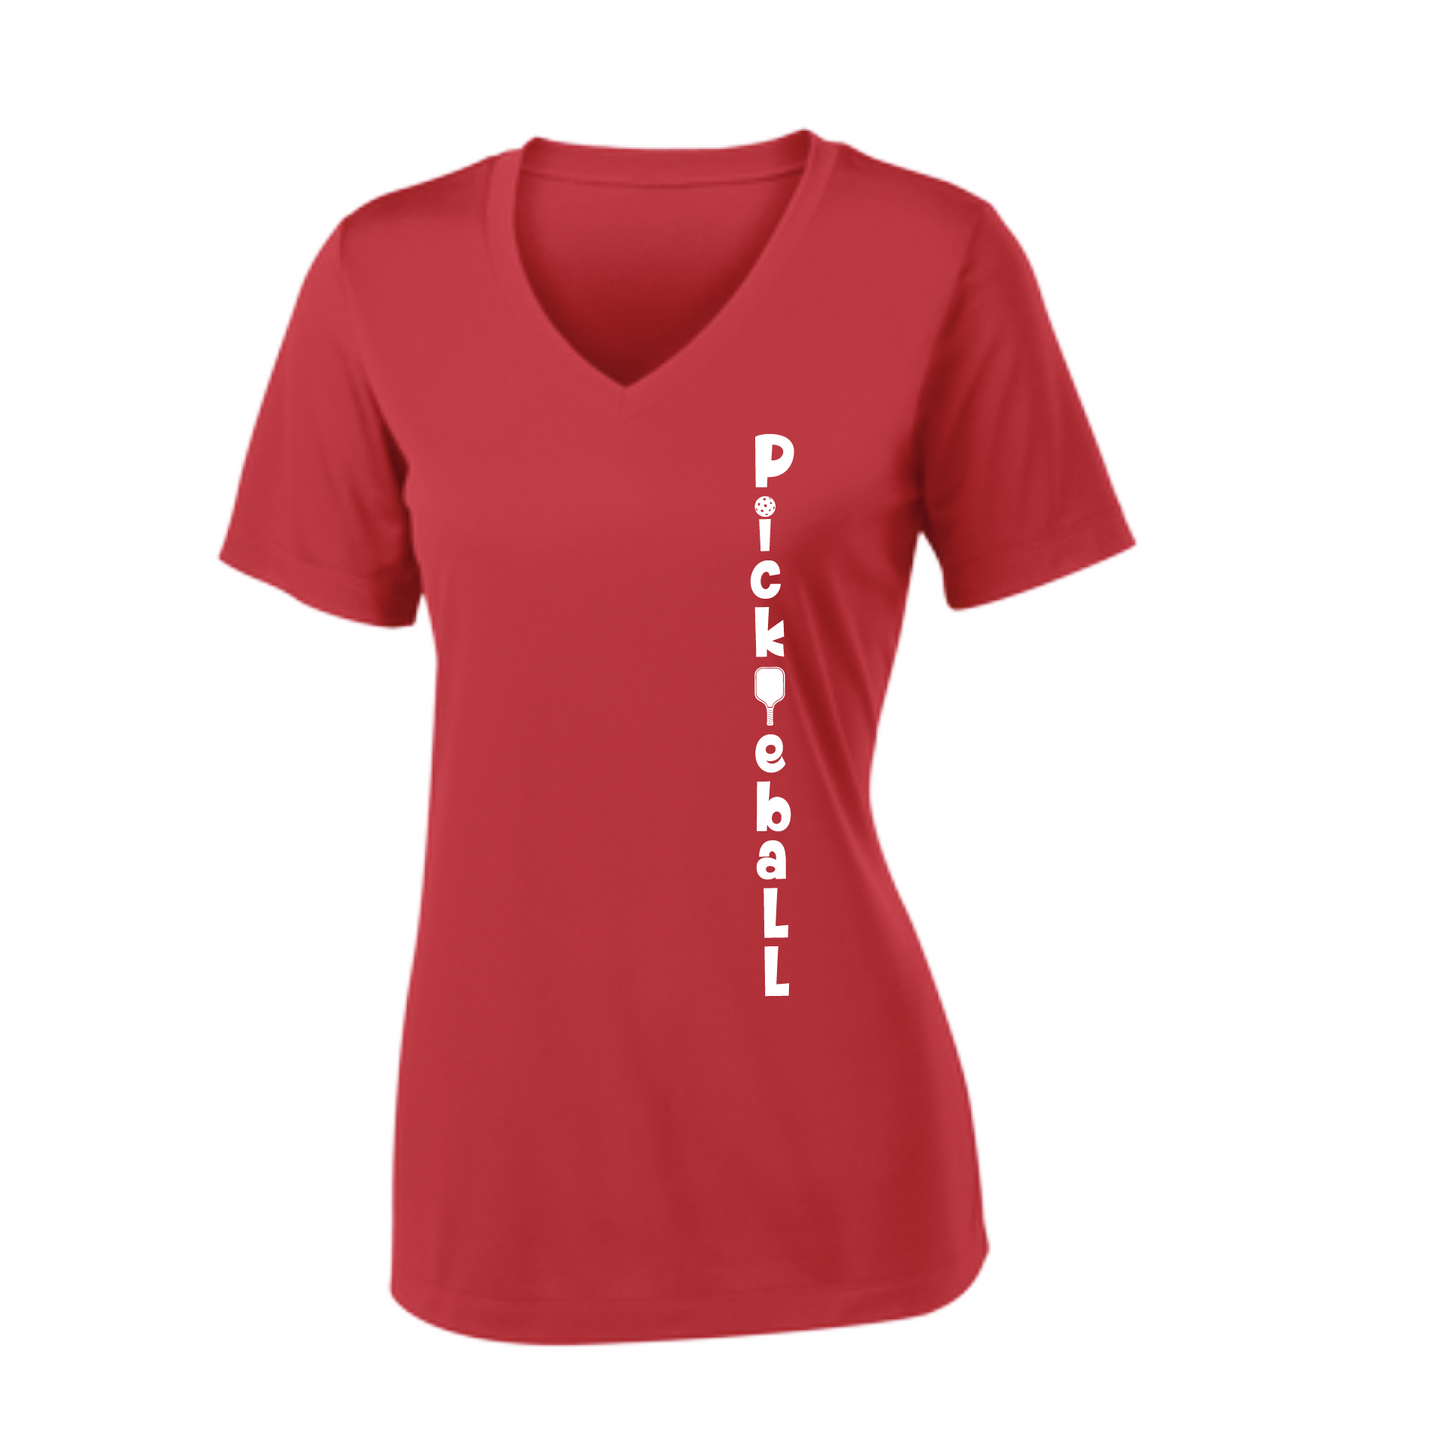 Pickleball Design: Pickleball Vertical Customizable Location  Women's Style: Short-Sleeve V-Neck  Shirts are lightweight, roomy and highly breathable. These moisture-wicking shirts are designed for athletic performance. They feature PosiCharge technology to lock in color and prevent logos from fading. Removable tag and set-in sleeves for comfort.